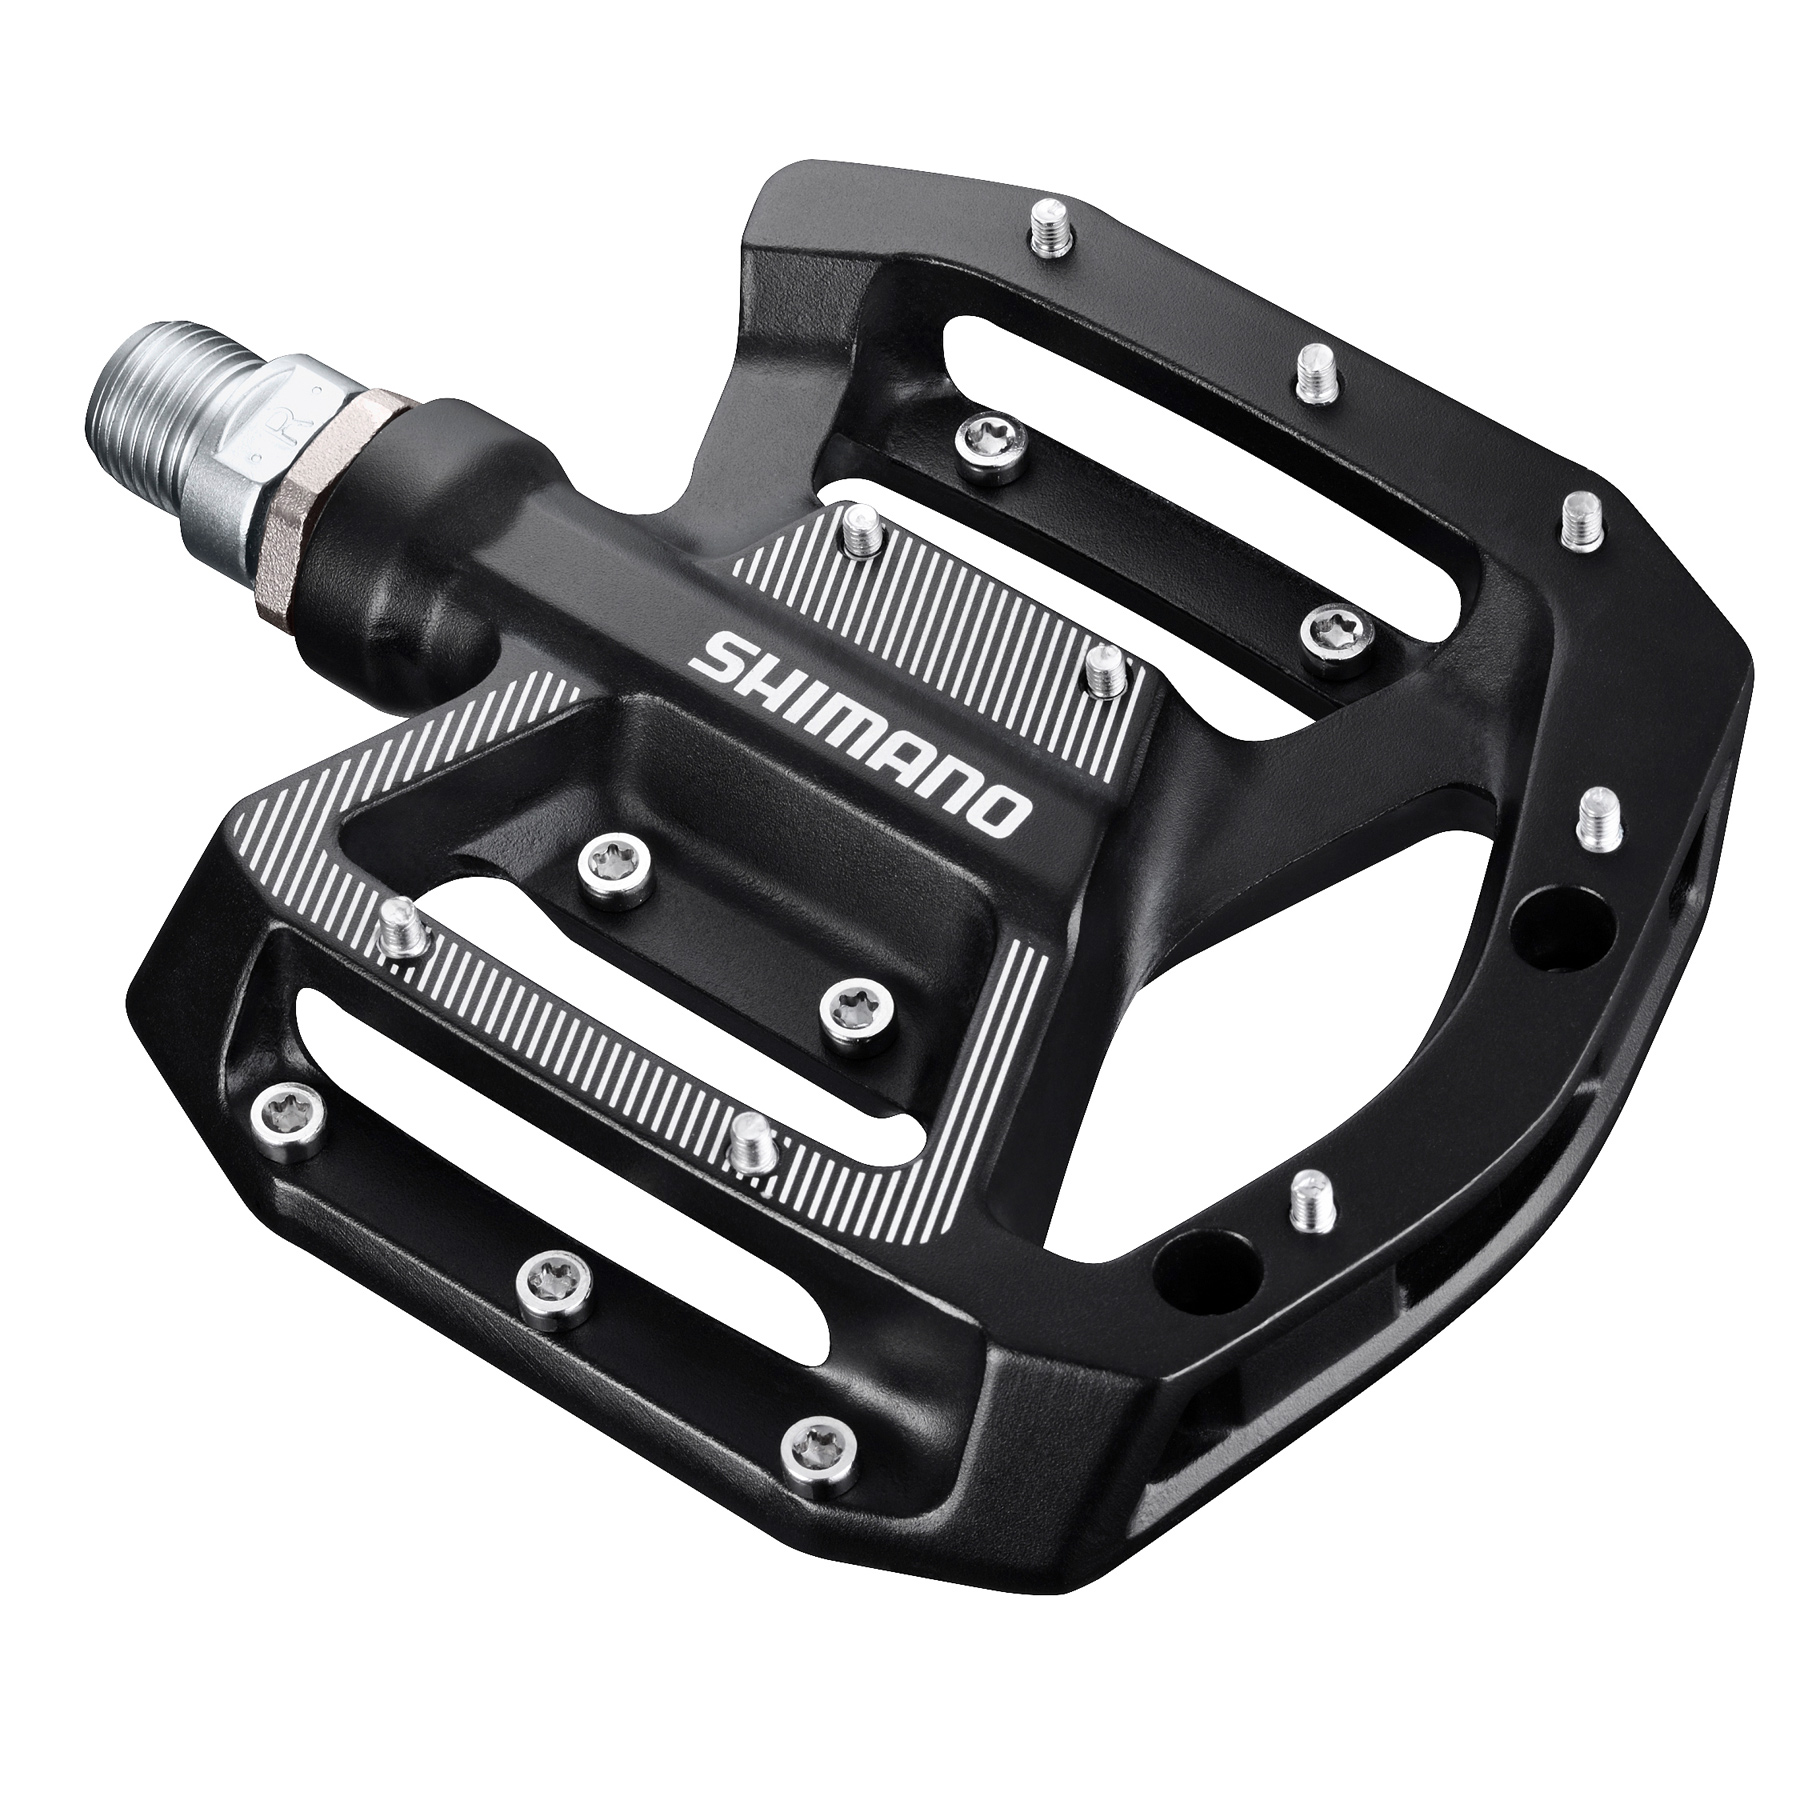 Picture of Shimano PD-GR500 Flat-Pedal - black